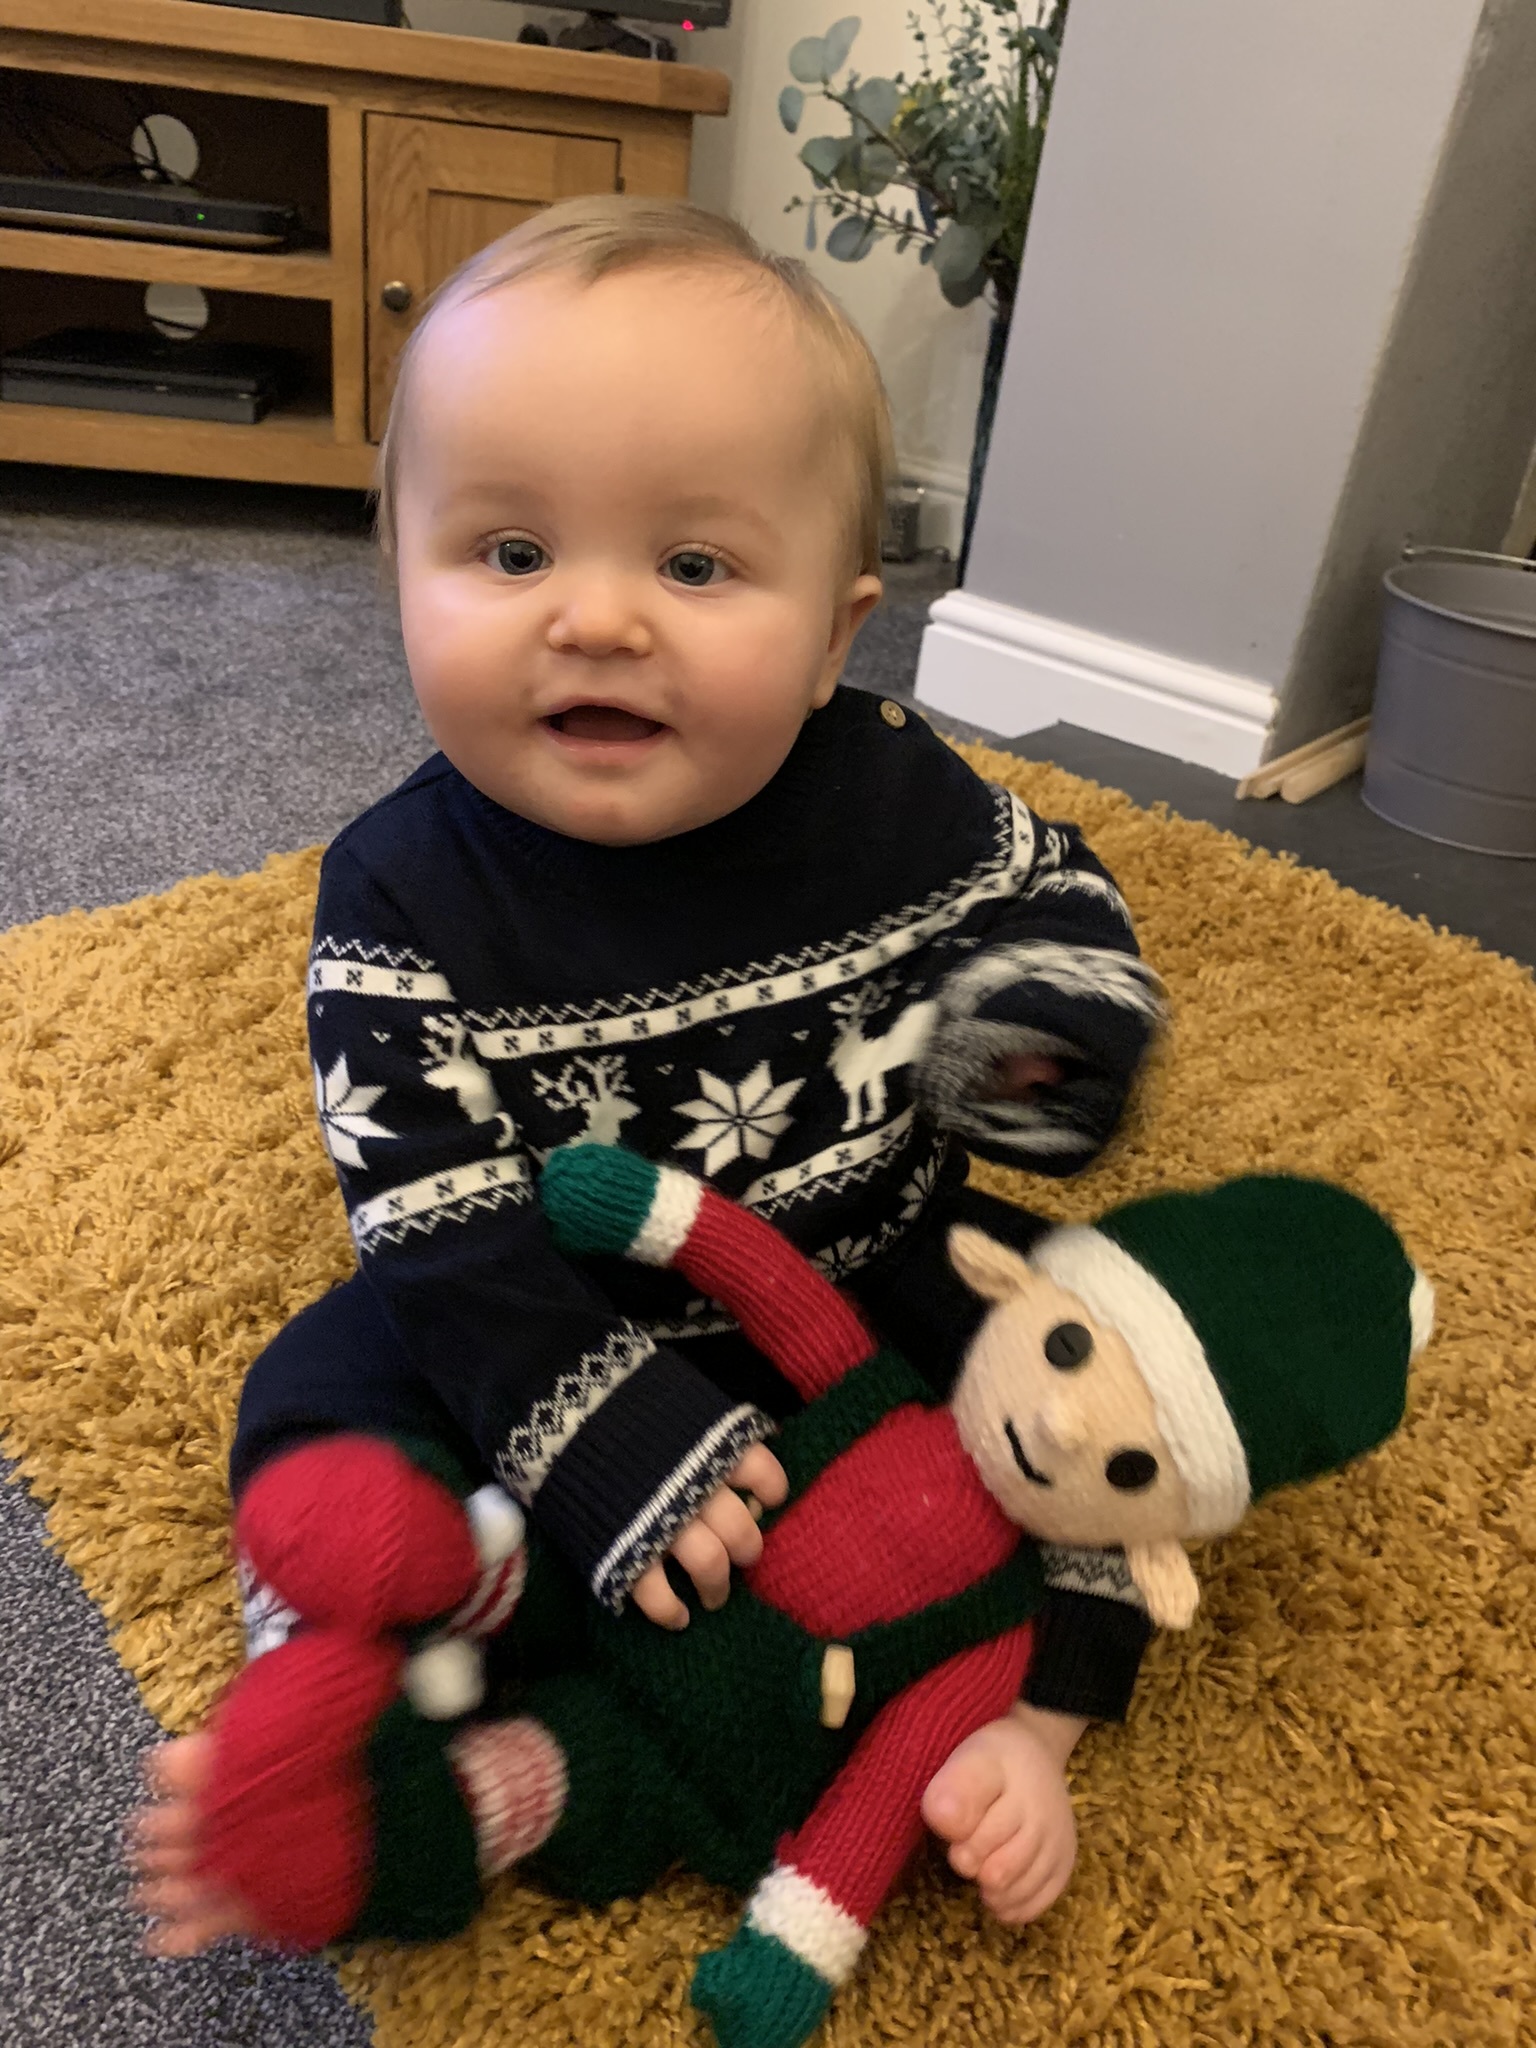 Sam Griffiths, from Rhostyllen: Arthur Llewellyn Griffiths at 10 months sitting and holding his Christmas elf that he had from the Christmas fate in Rhostyllen Parrish hall, made by Janet Williams.